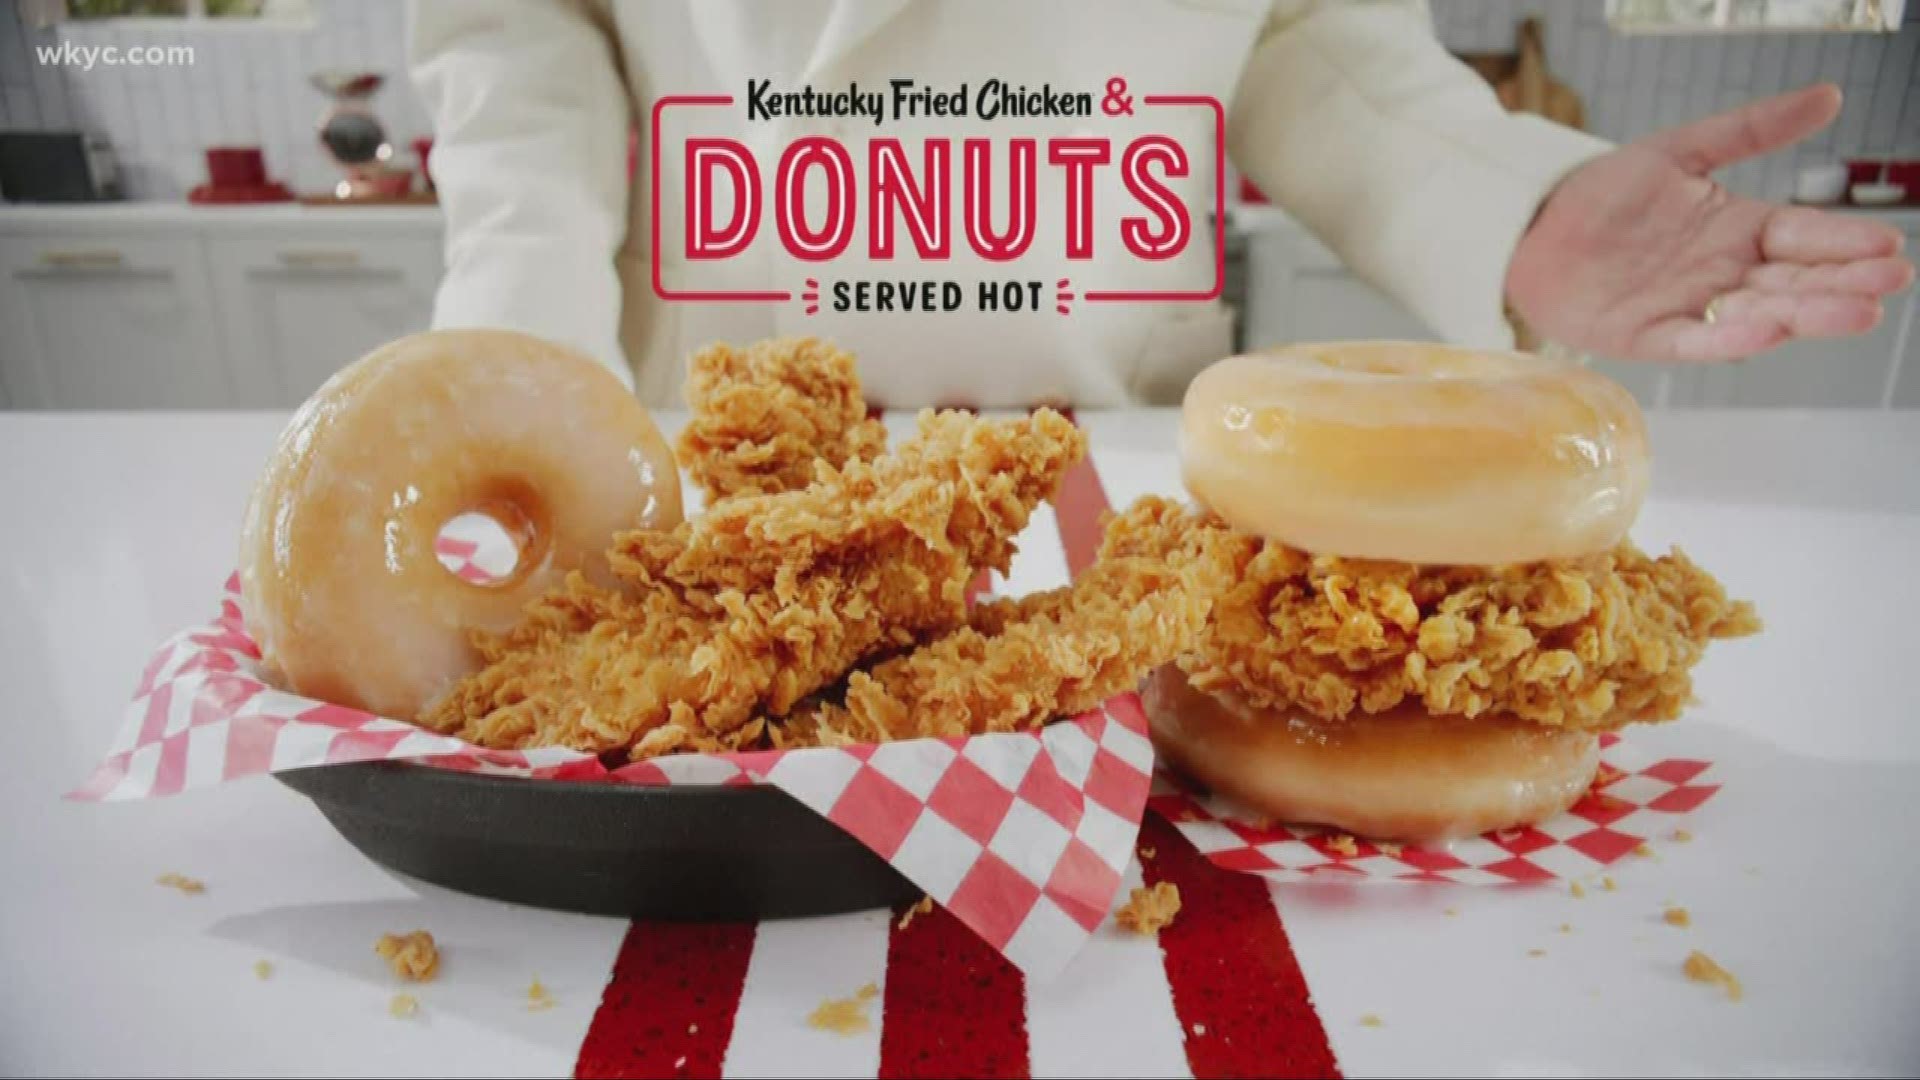 KFC launched their chicken and donuts sandwich nationwide Monday. Jay and Betsy give it a try on What's New.